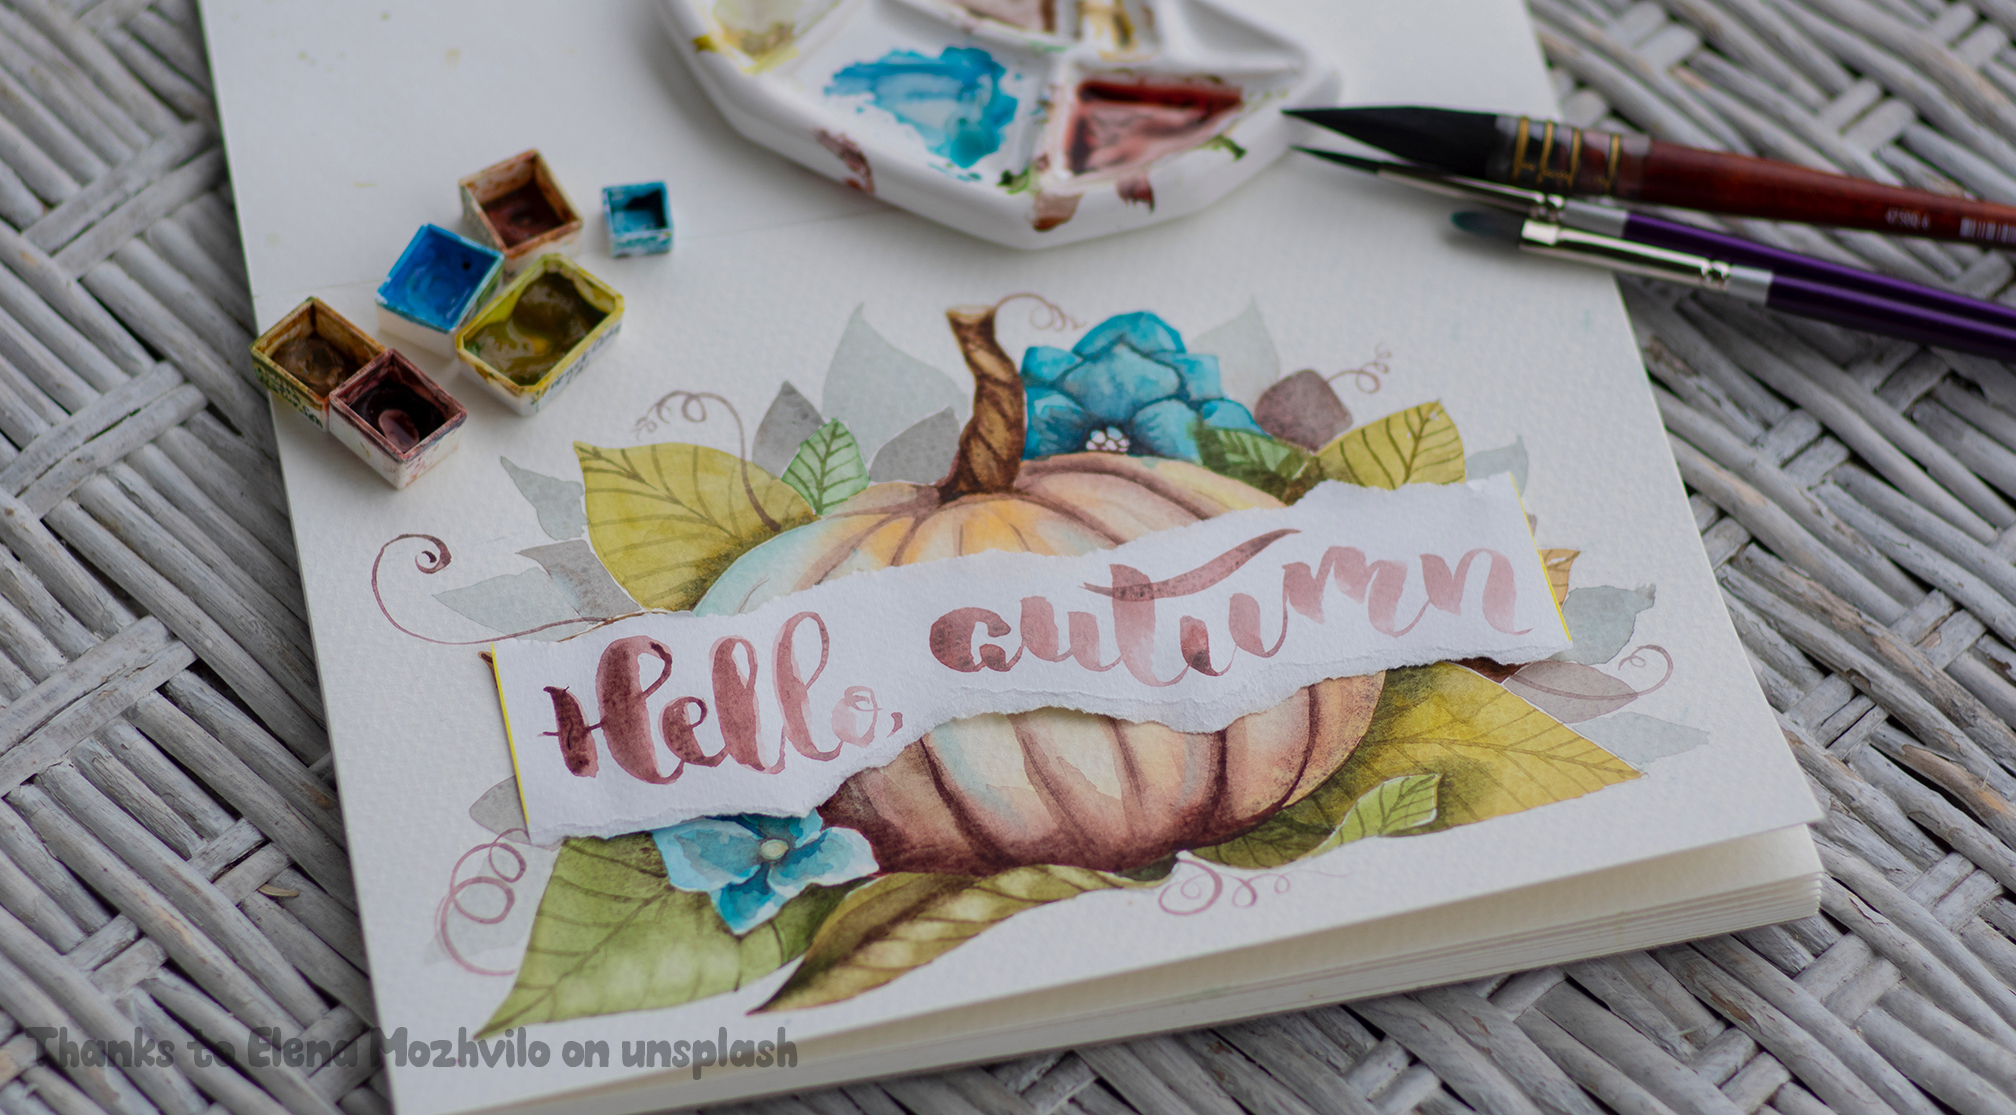 A beautiful painting of a watercolour pumpkin with hand written calligraphy which reads 